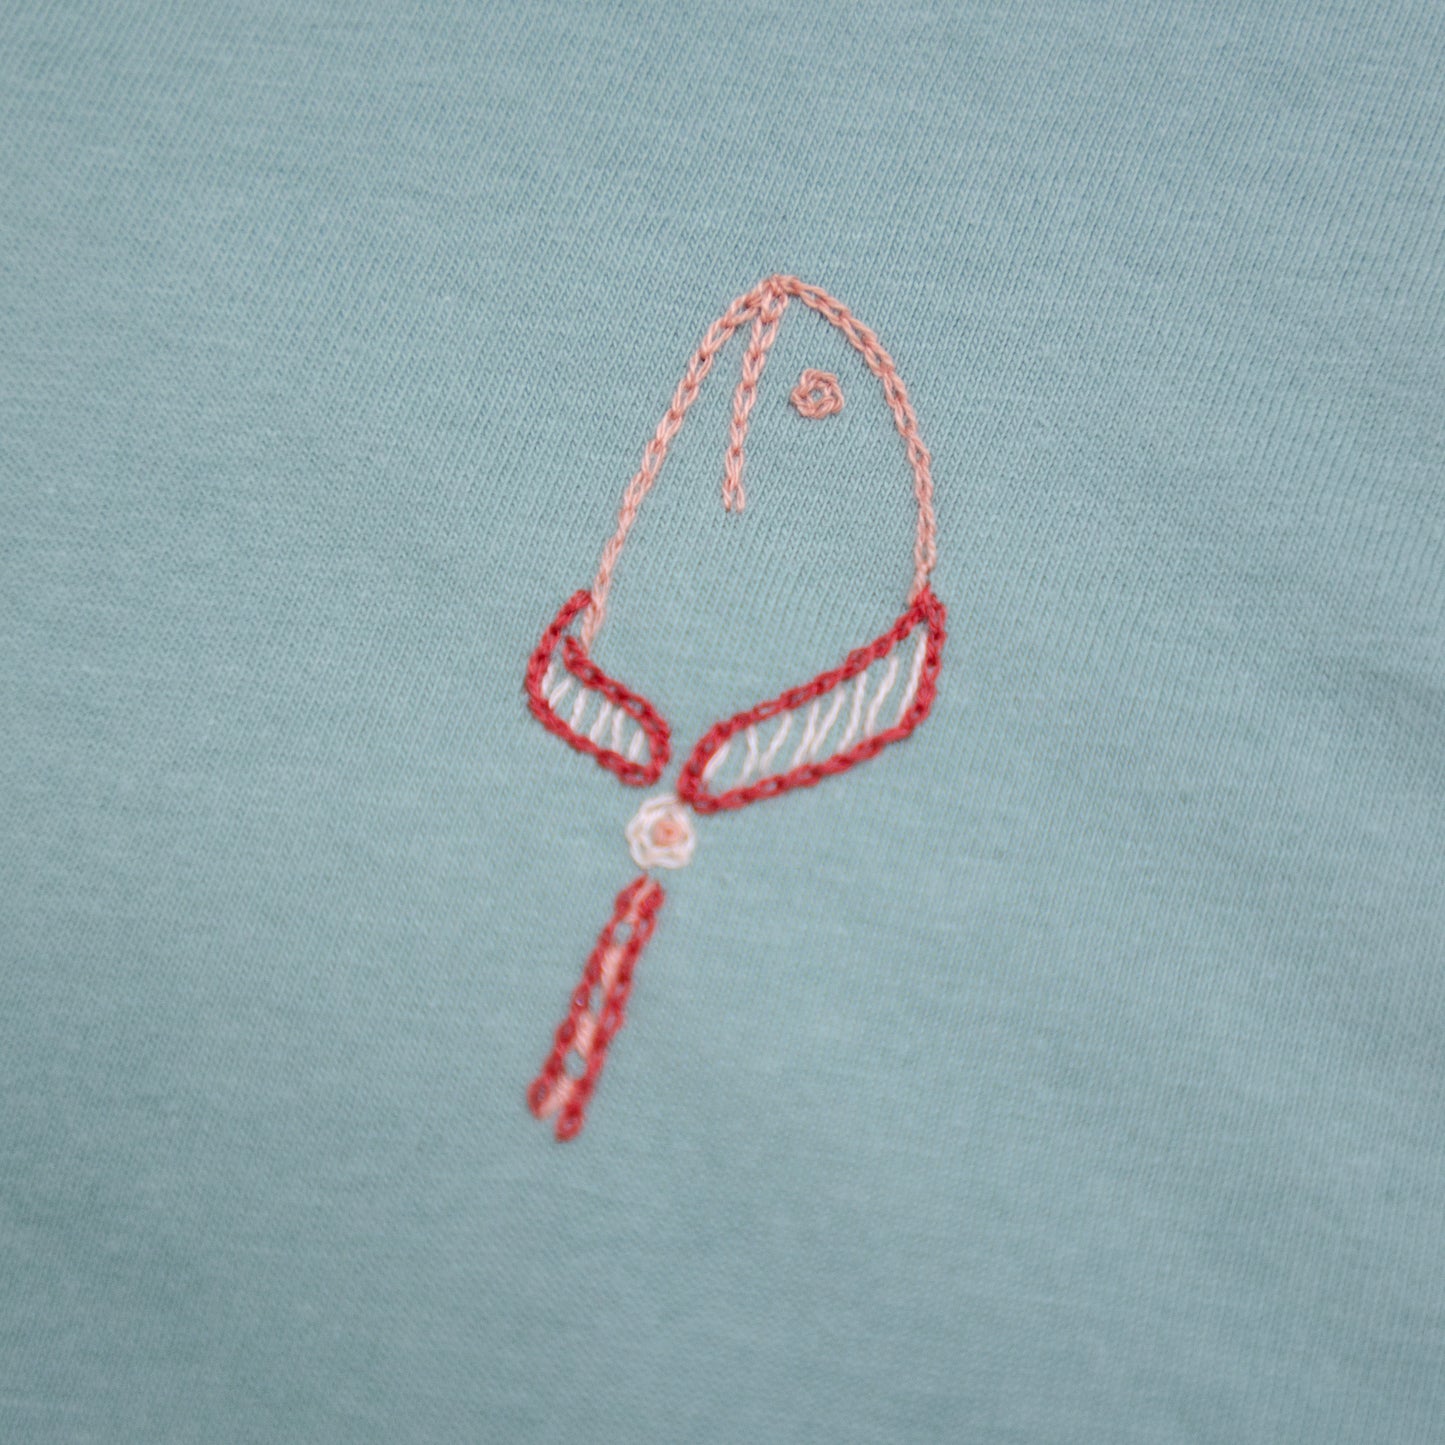 Embroidered T-Shirt - Kelp